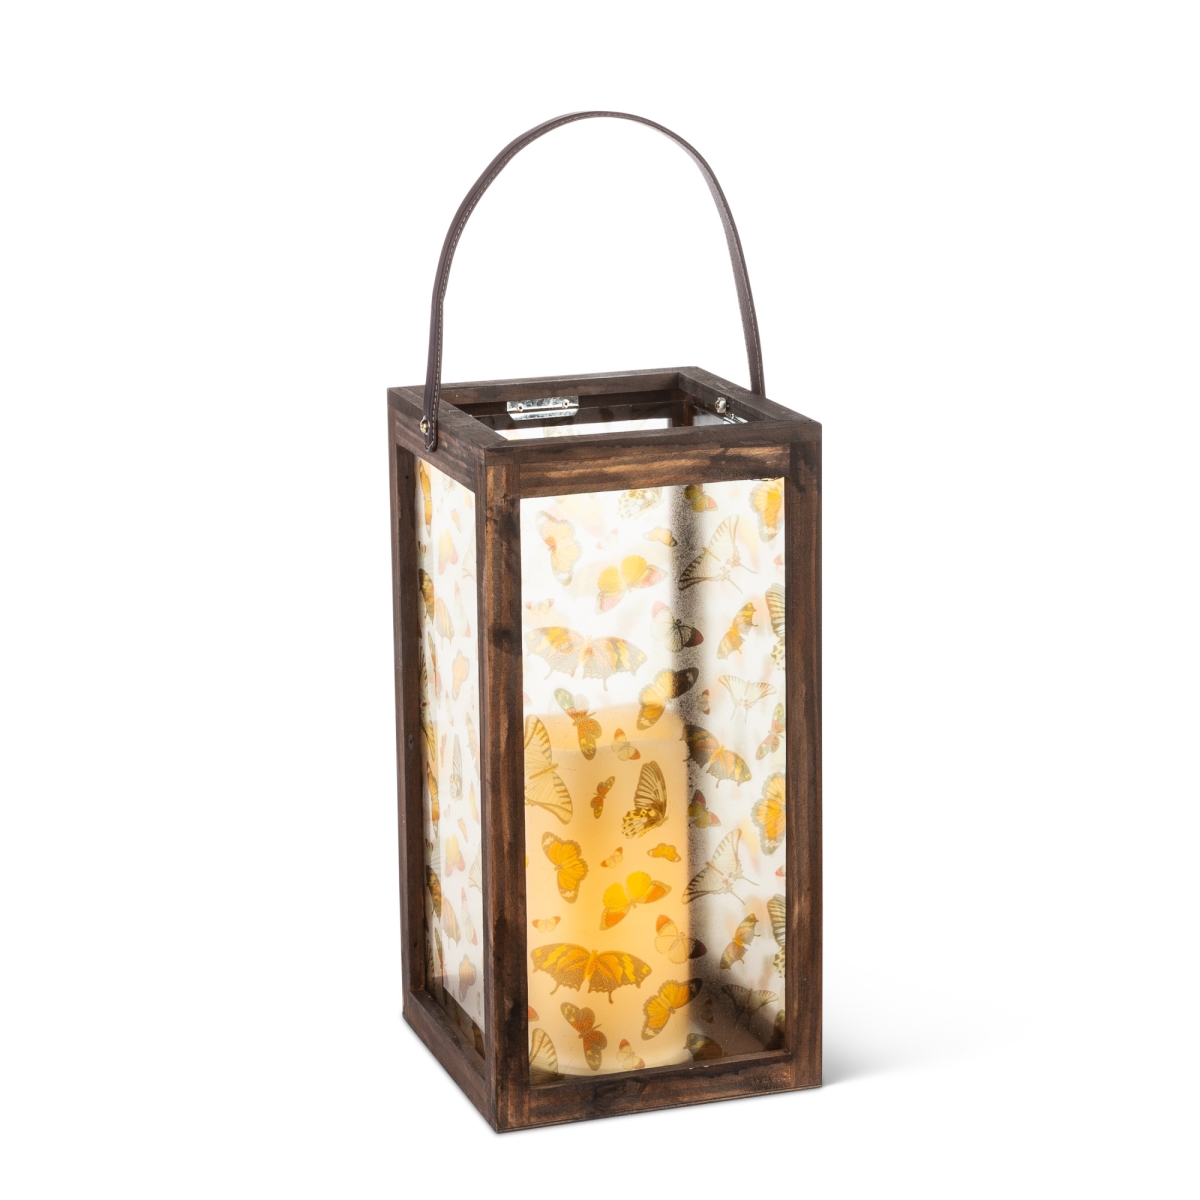 Gerson 44627ec 16 In. Wood Lantern With Yellow Butterfly Art Work On Glass Panes, Warm White Led Candle With 5-hour Timer - Multi Color